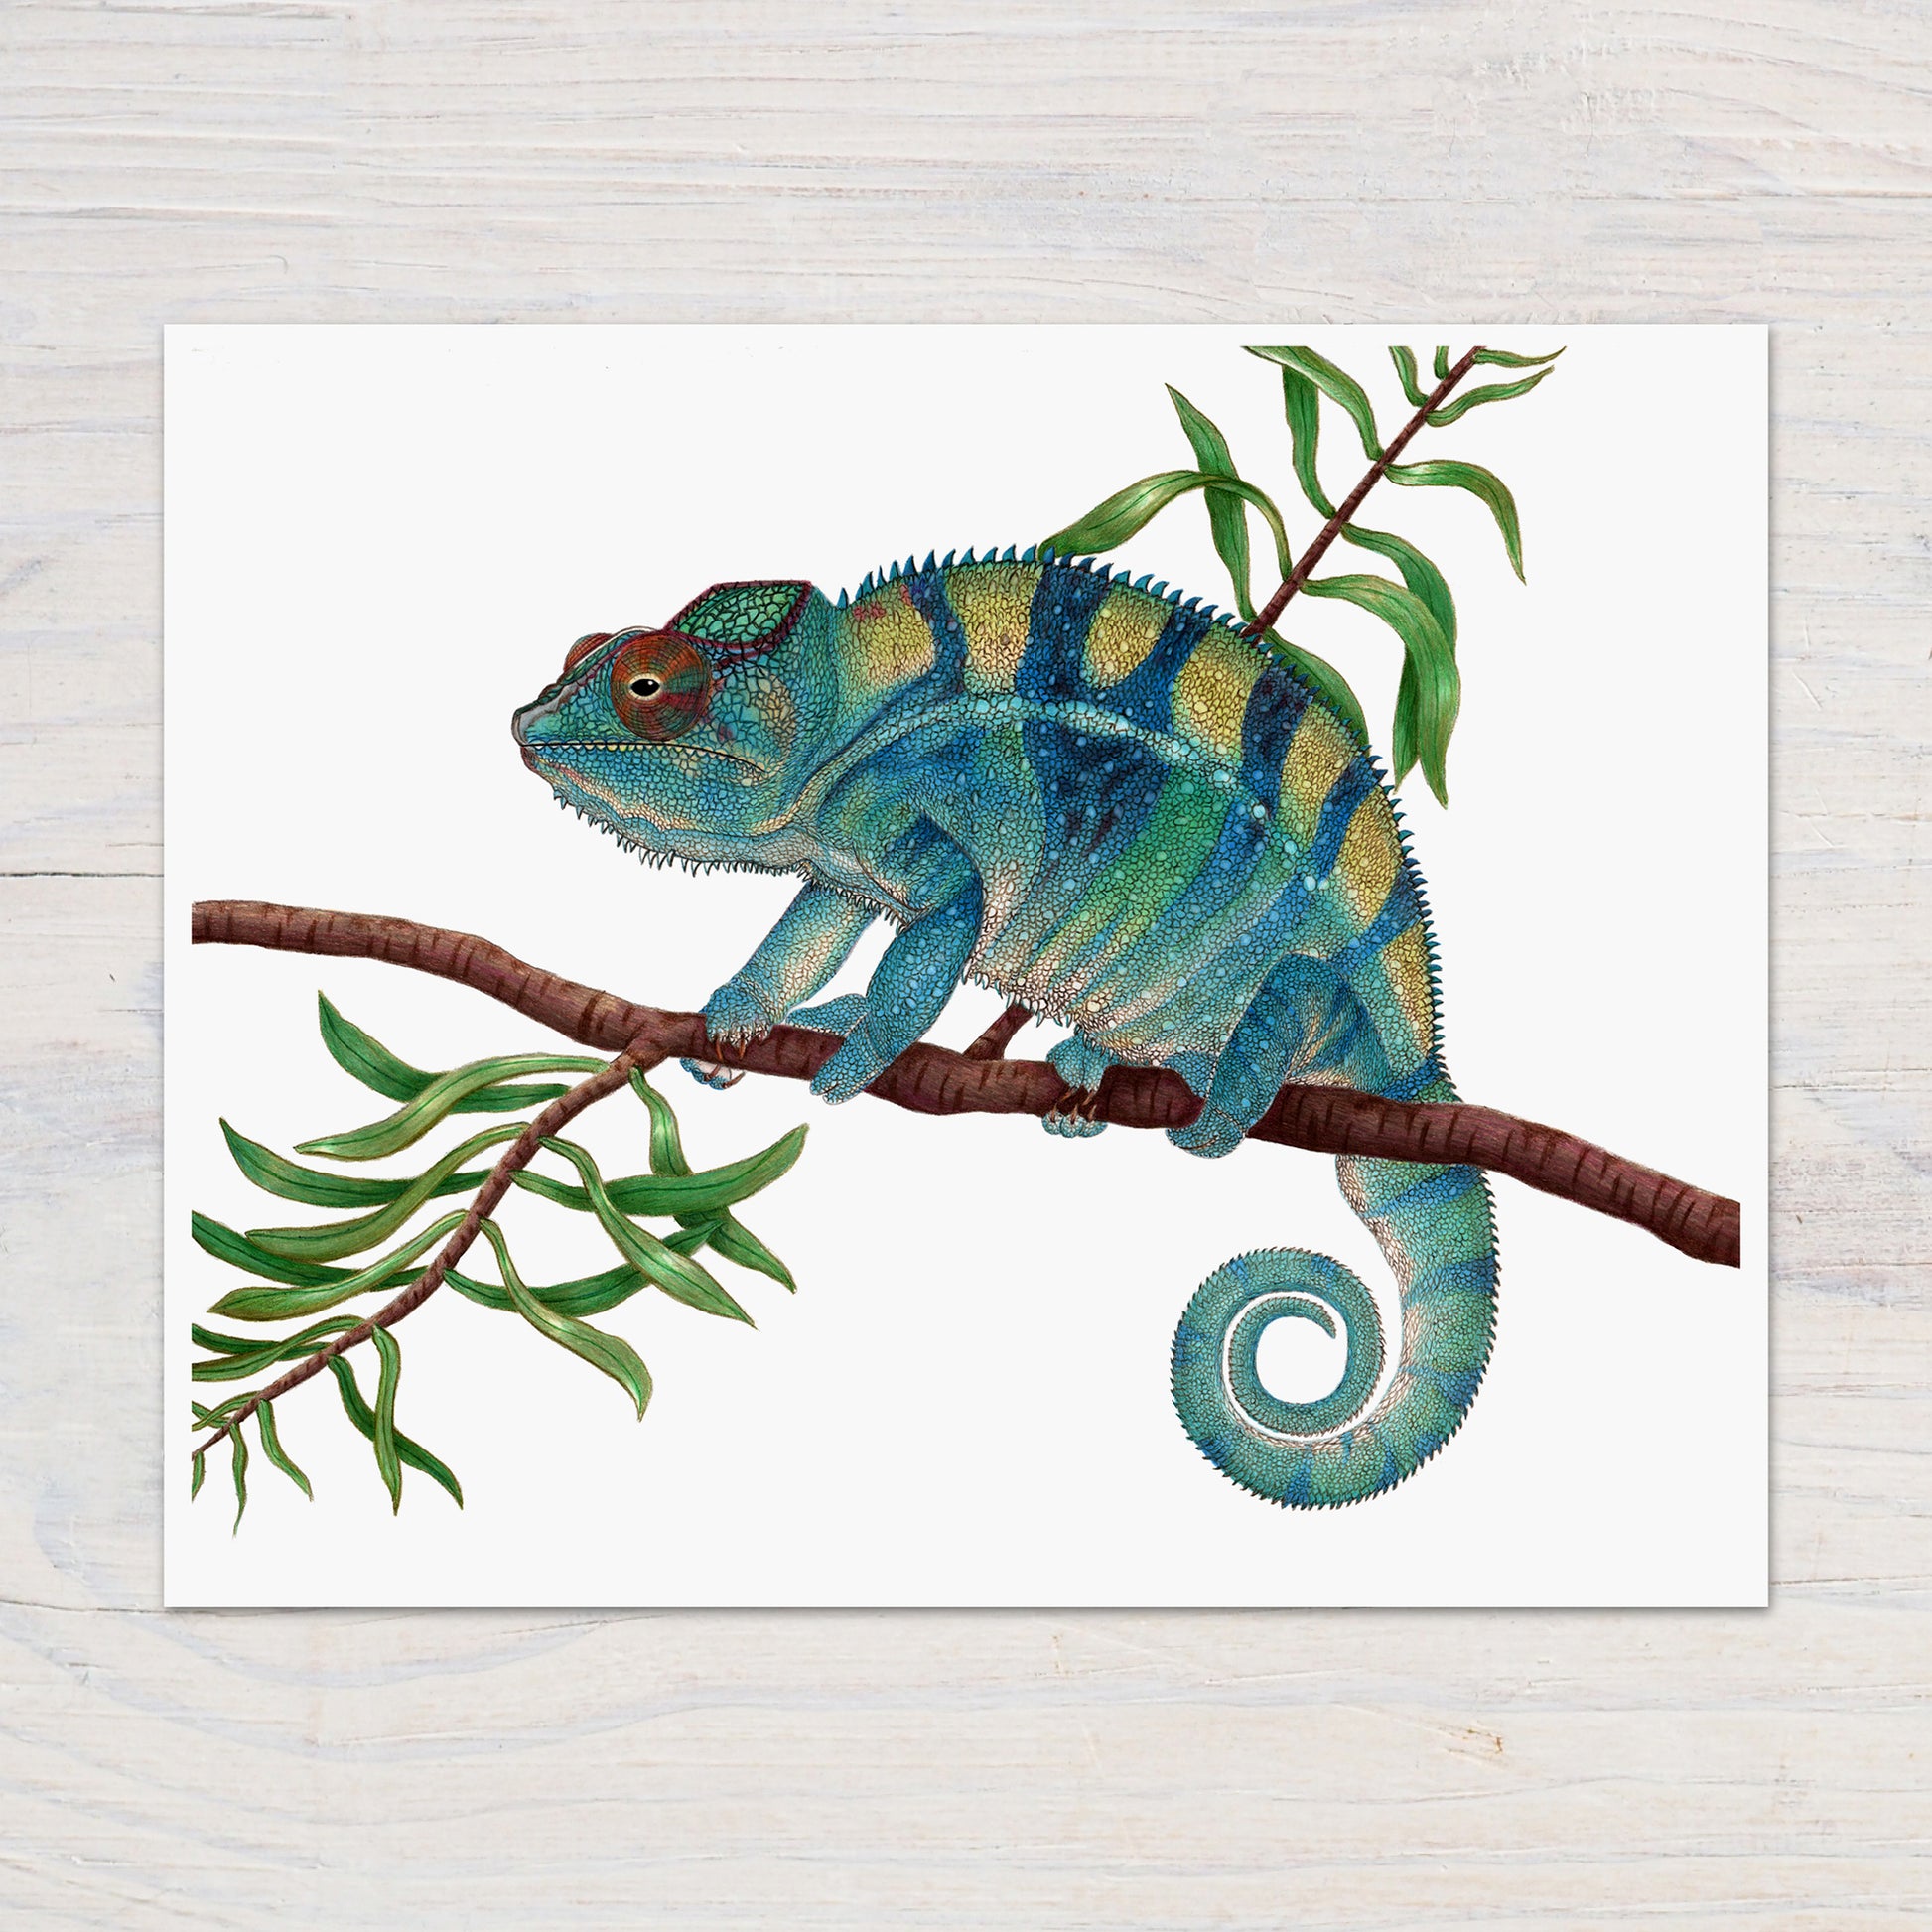 Hand drawn pencil art of panther chameleon by Rachel Diaz-Bastin. Prints available.